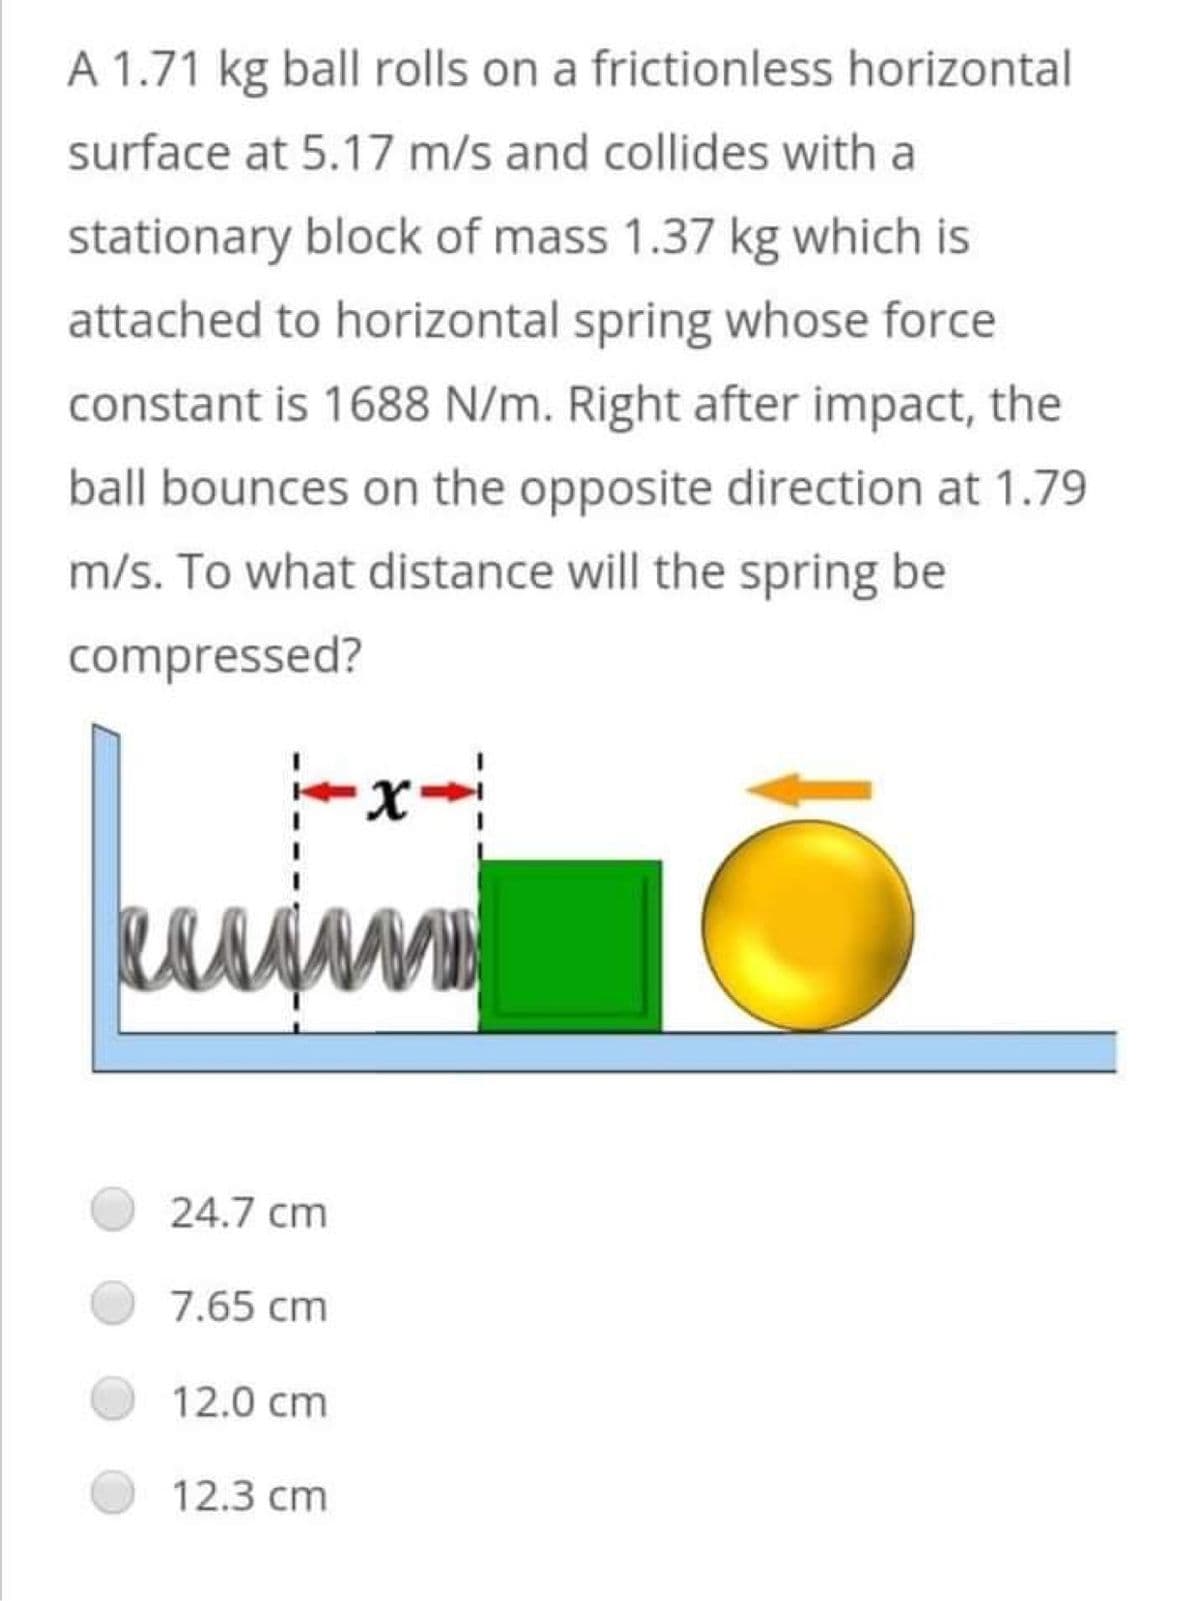 A 1.71 kg ball rolls on a frictionless horizontal
surface at 5.17 m/s and collides with a
stationary block of mass 1.37 kg which is
attached to horizontal spring whose force
constant is 1688 N/m. Right after impact, the
ball bounces on the opposite direction at 1.79
m/s. To what distance will the spring be
compressed?
x-
esss
MD
24.7 cm
7.65 cm
12.0 cm
12.3 cm